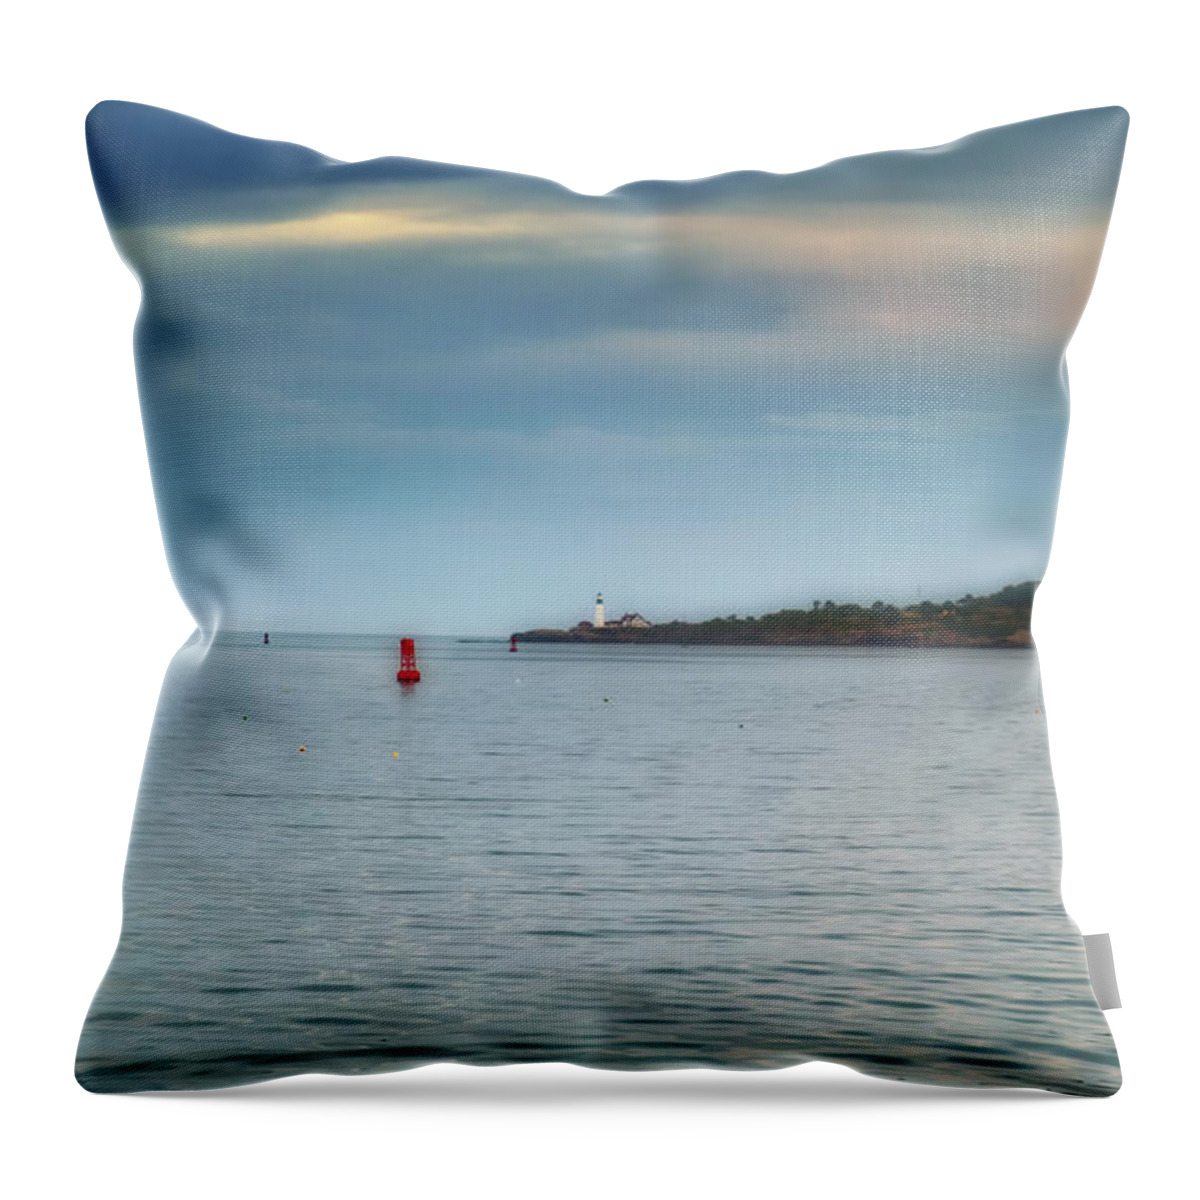 Architecture Throw Pillow featuring the photograph Evening Voyages by Richard Bean